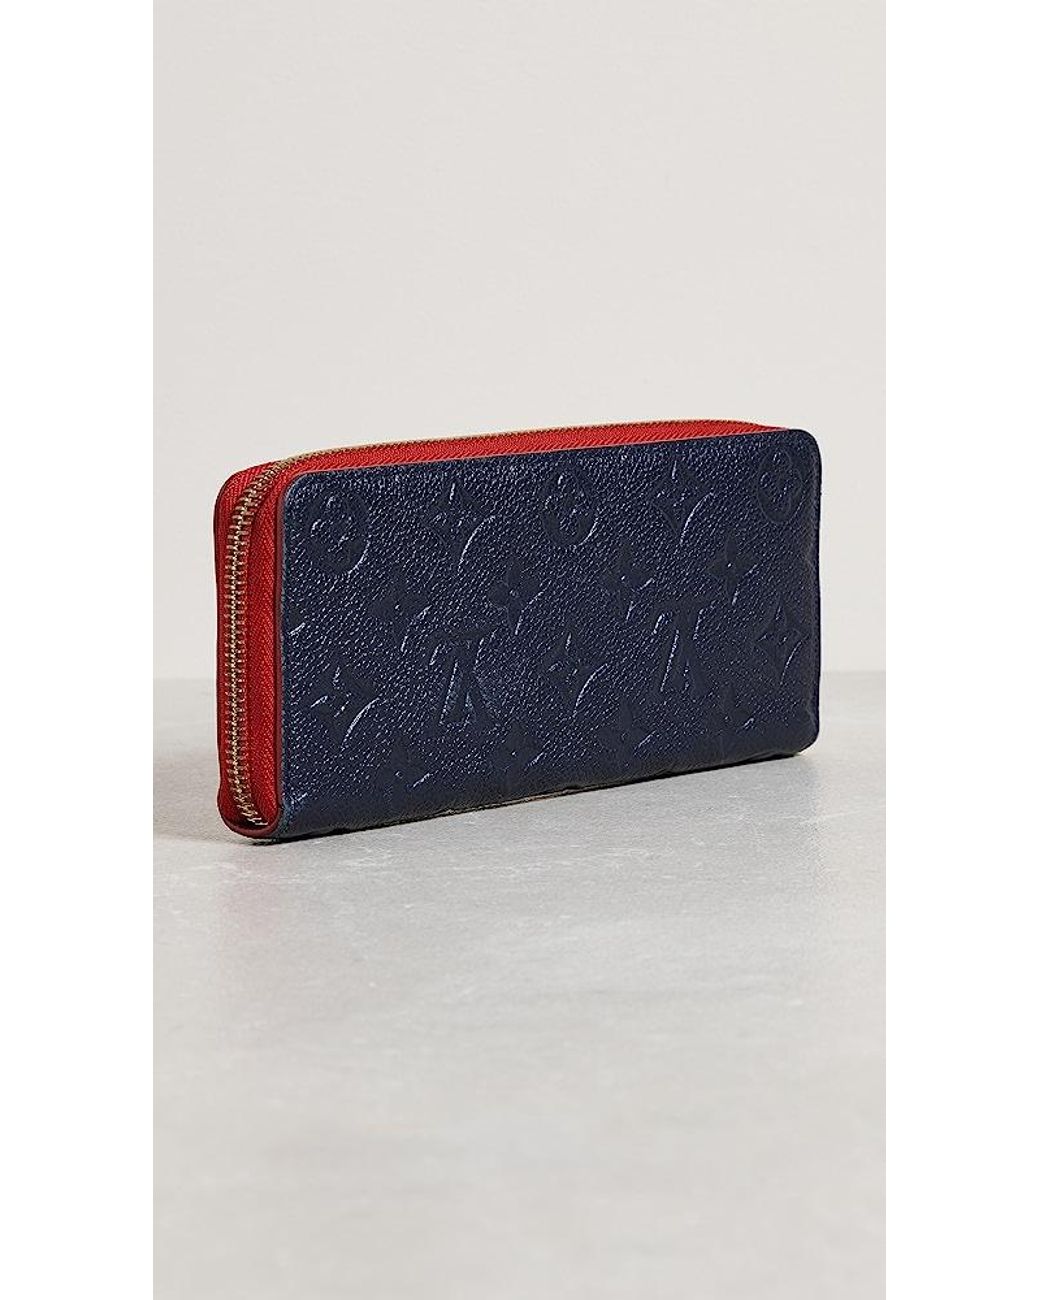 What Goes Around Comes Around Louis Vuitton Flower Clemence Wallet in Blue